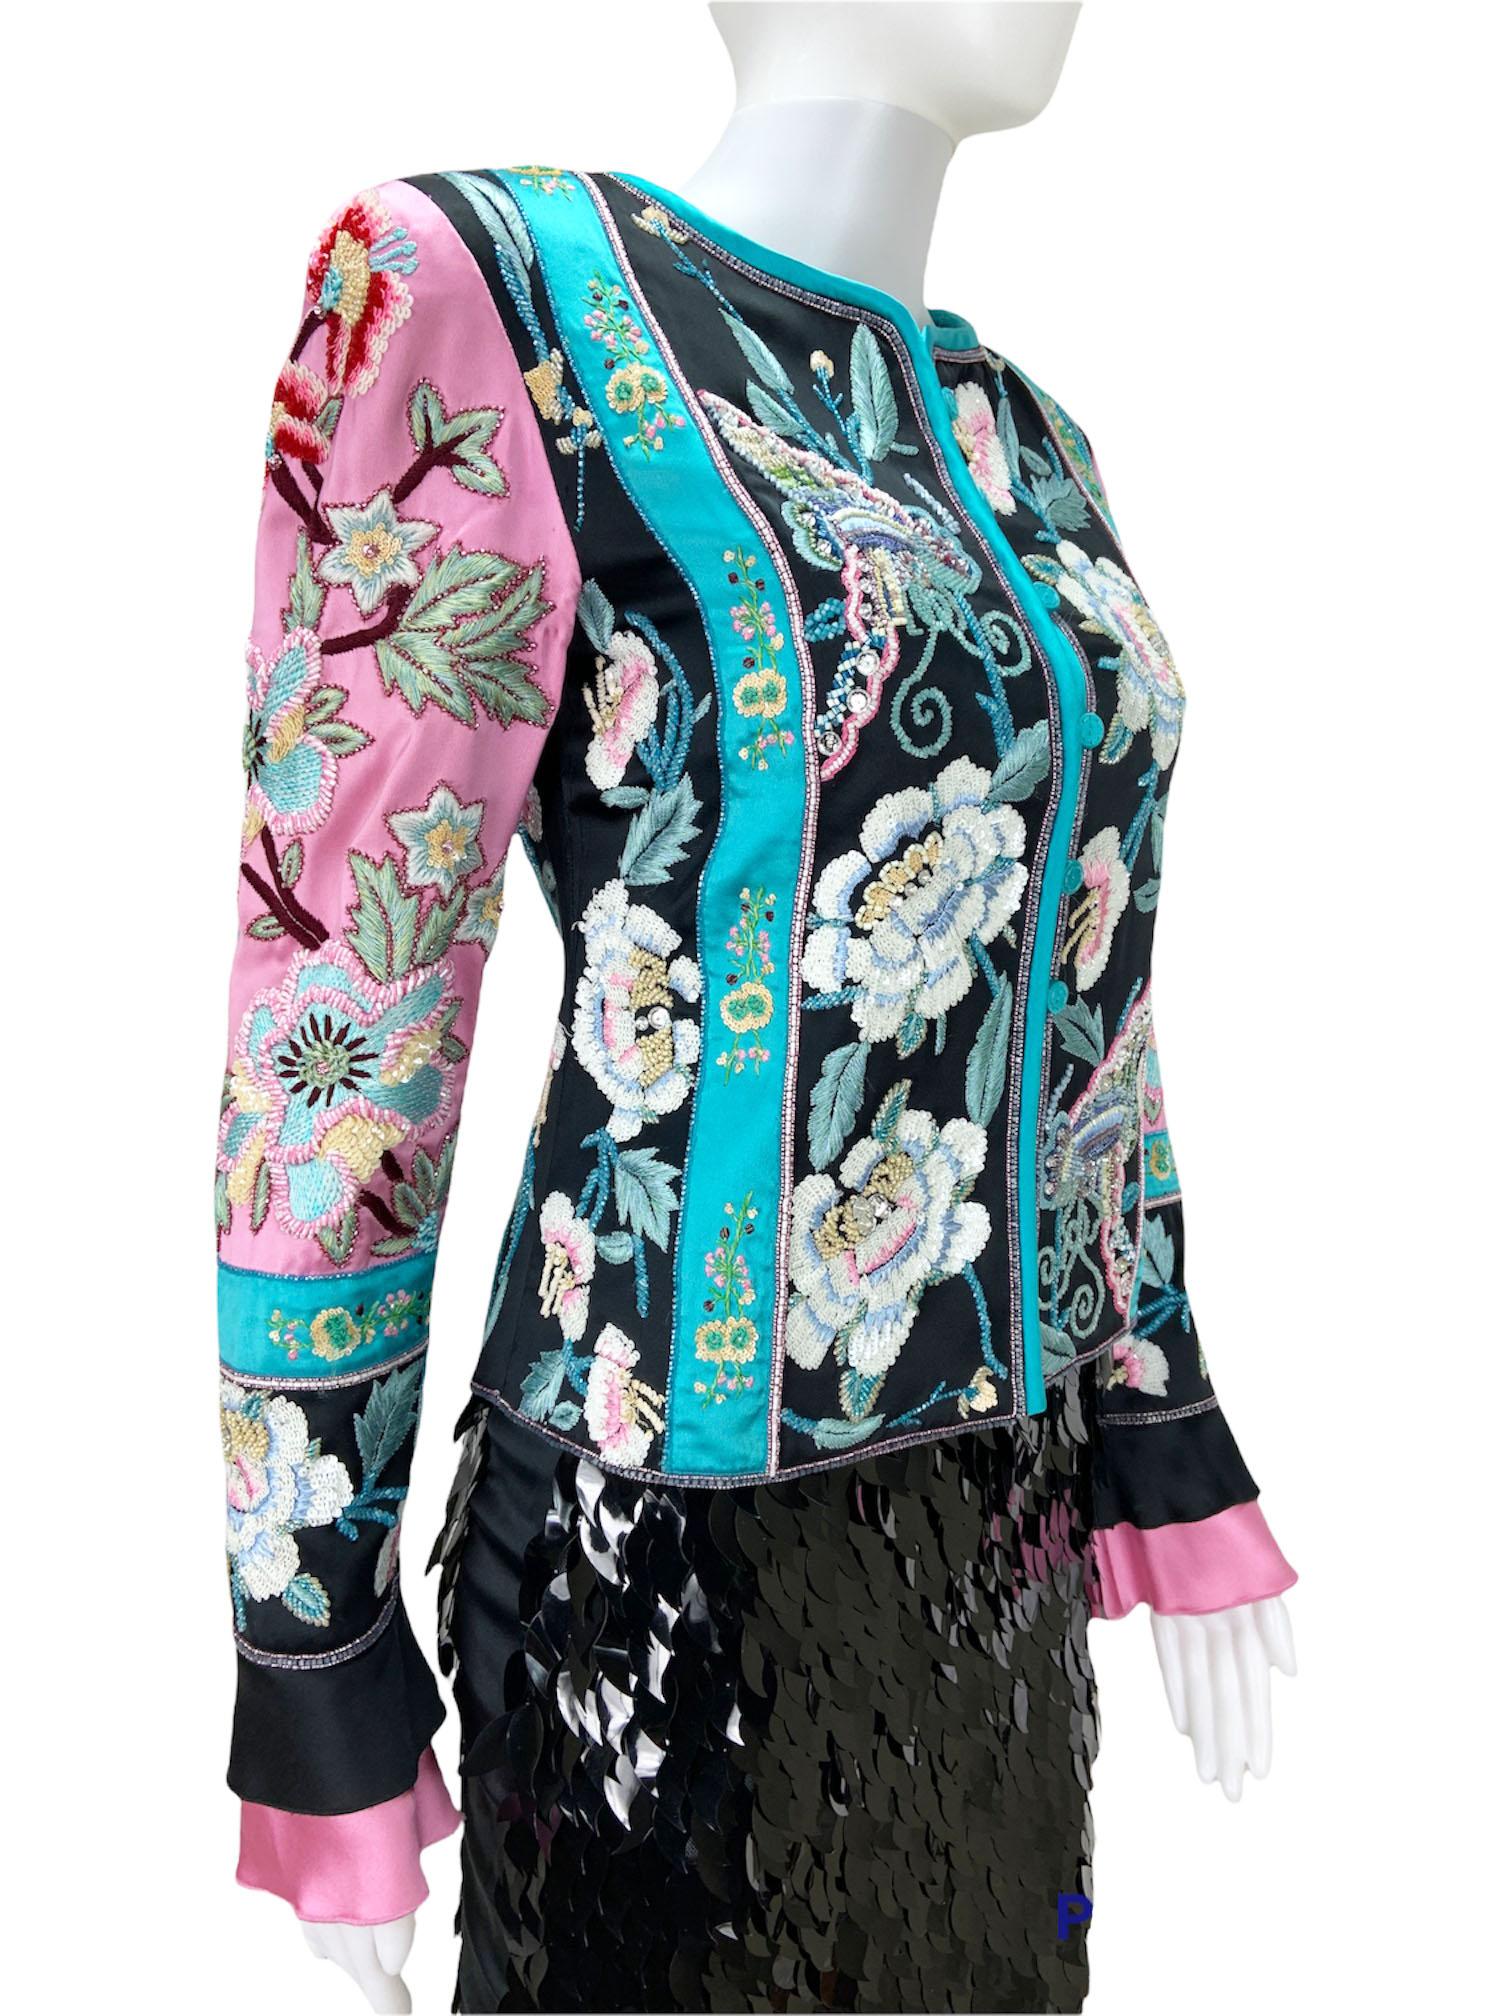 Black Valentino S/S 2006 Runway Silk Fully Beaded & Embroidered Jacket Blazer size 4 For Sale